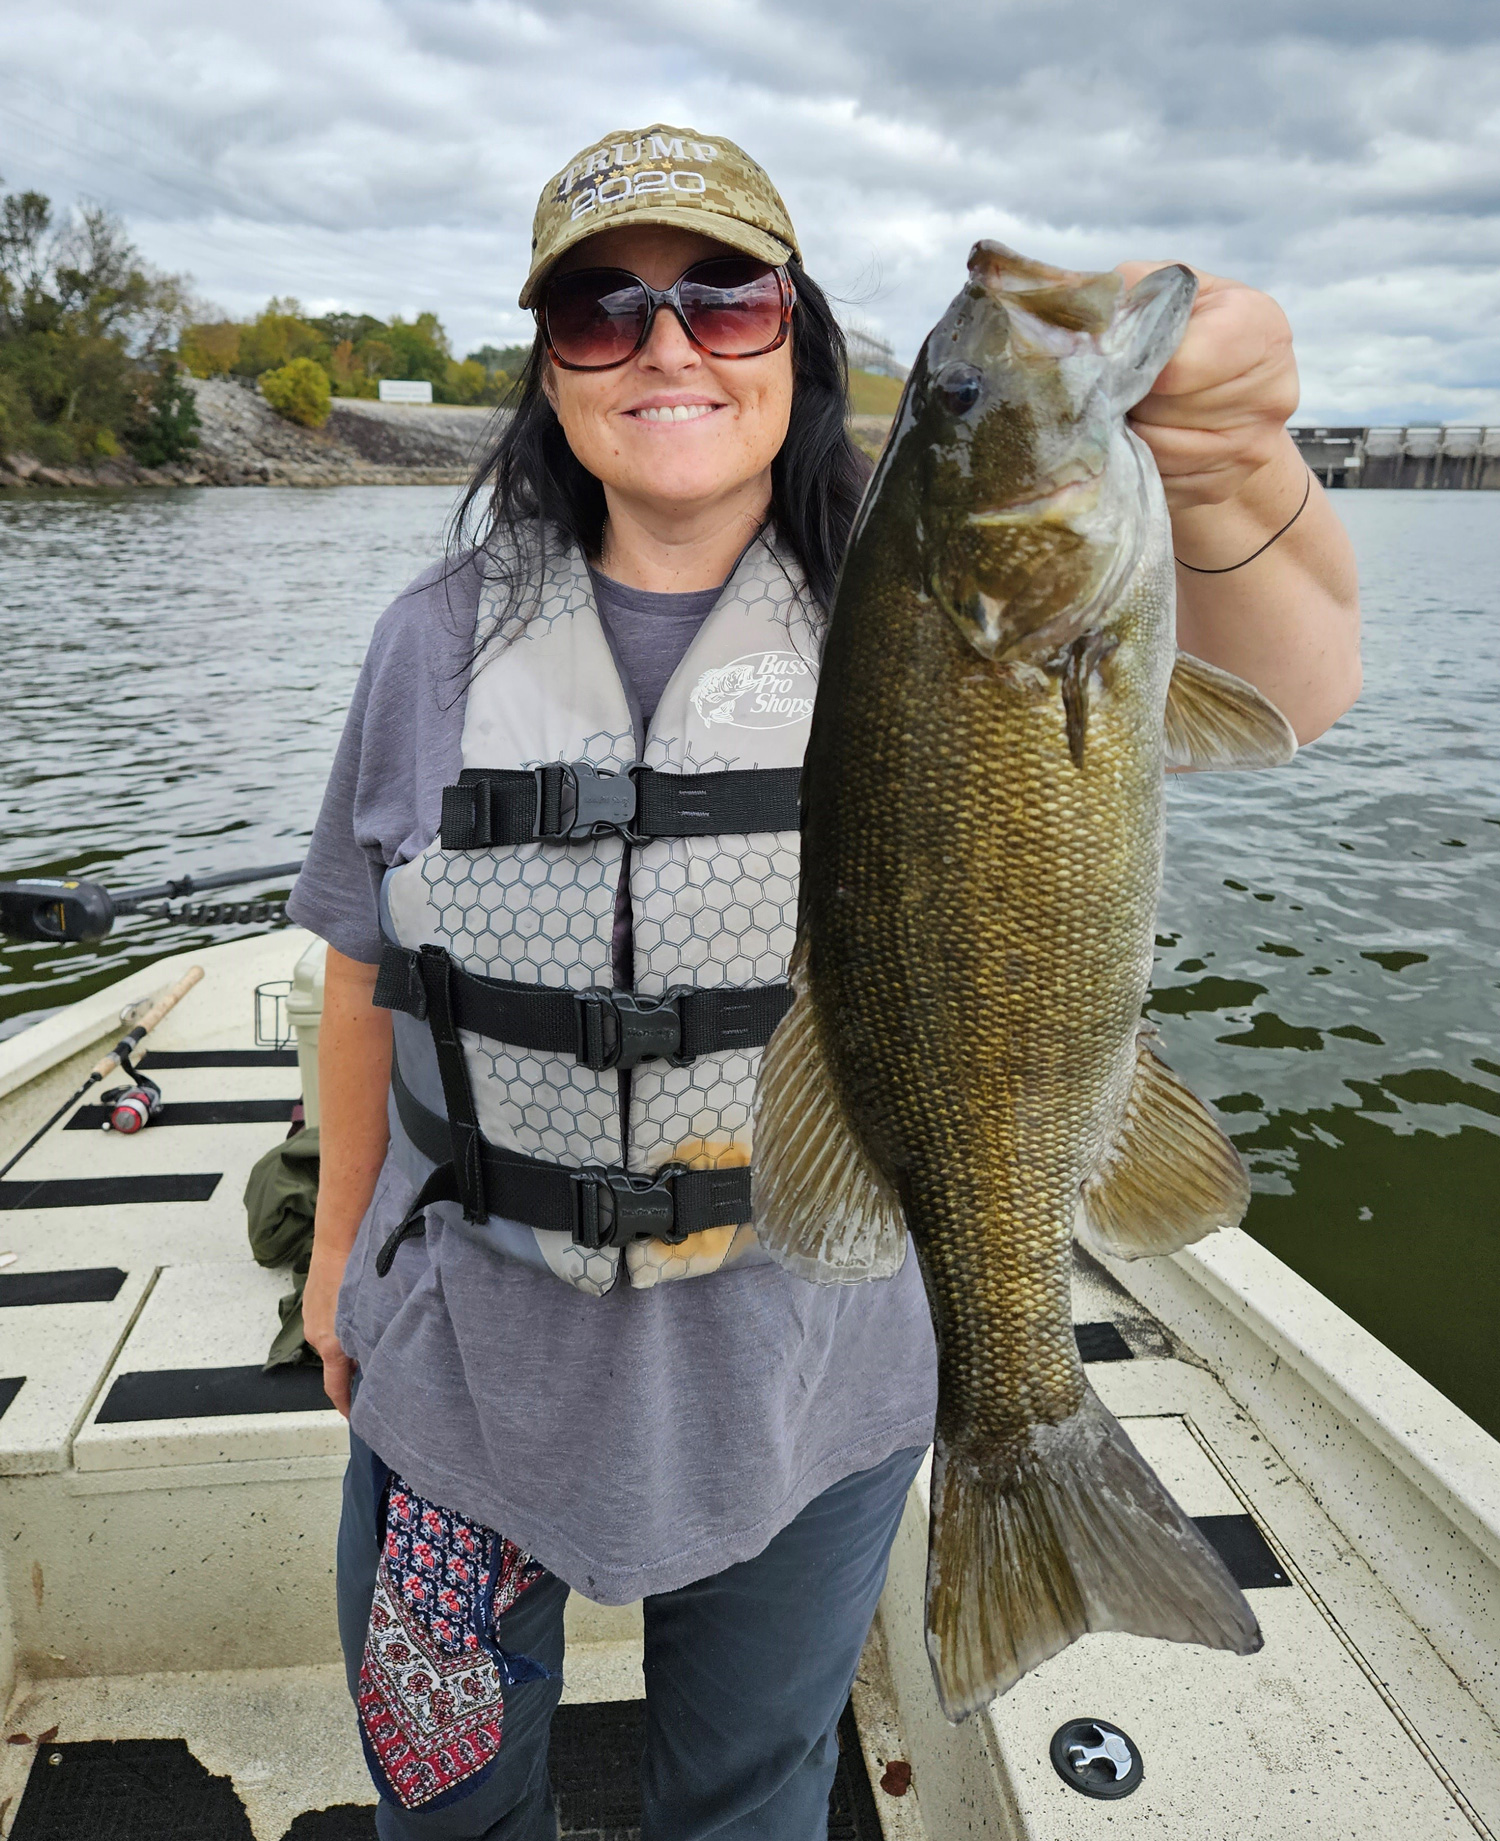 Fishing report for KS, MO lakes, rivers, reservoirs, 9/26/18